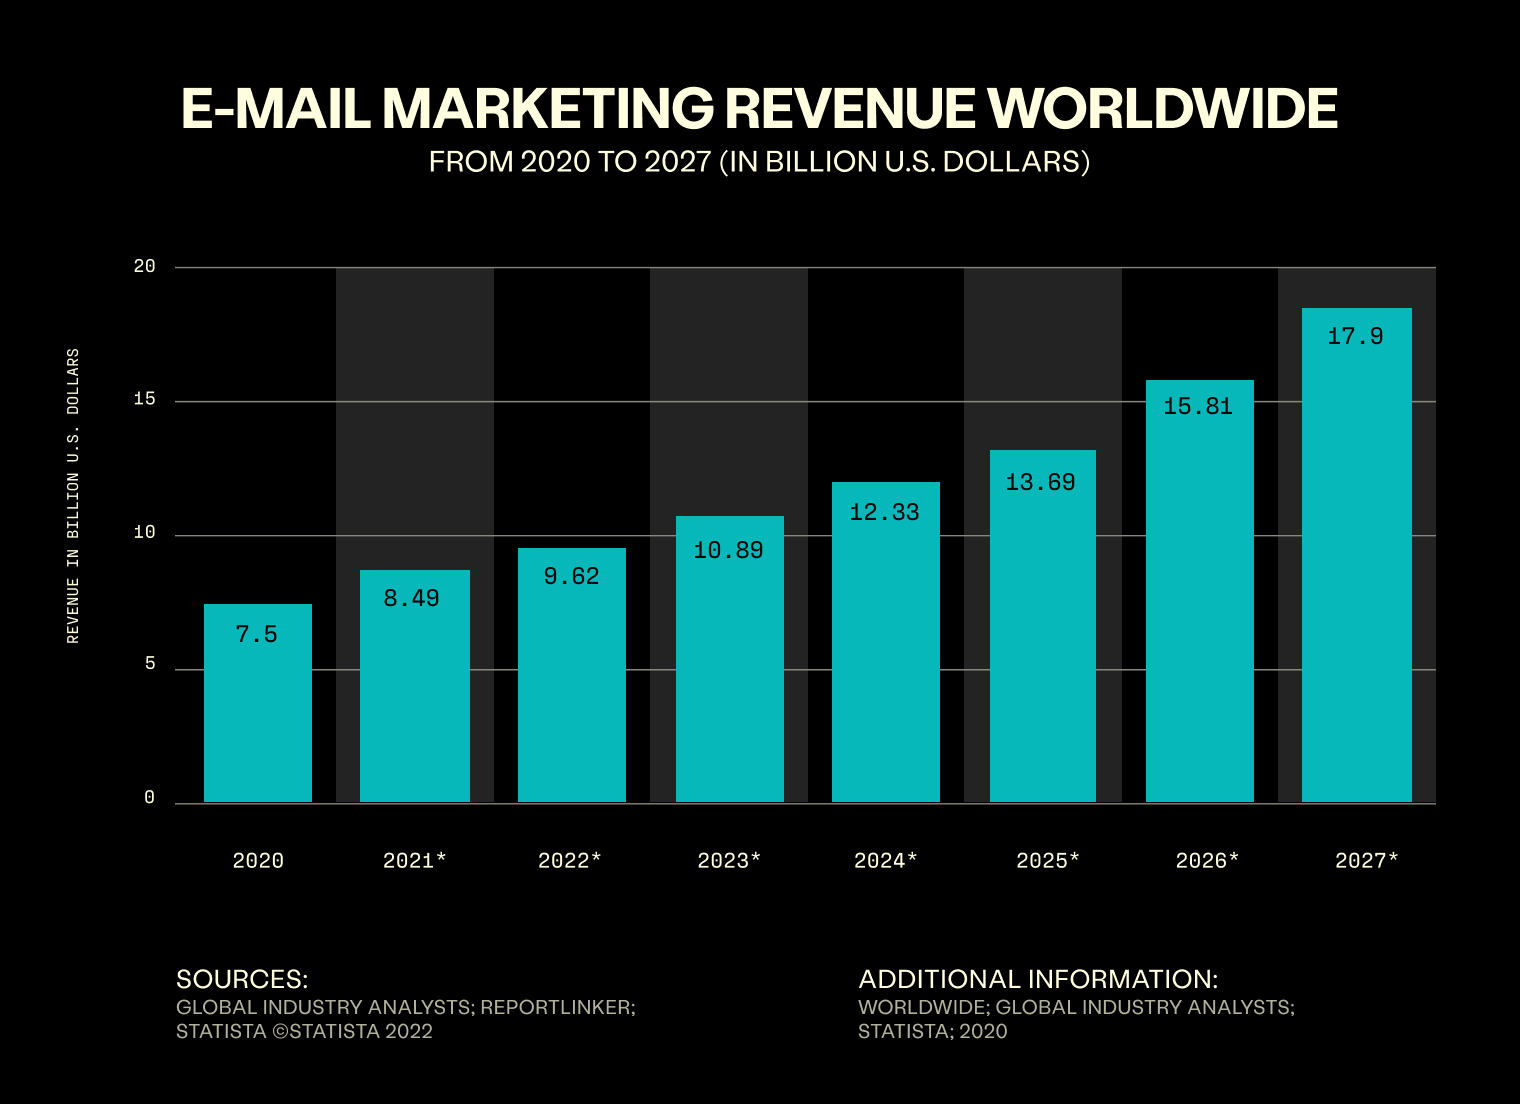 Email marketing revenue worldwide is seen to grow over the next 5 years by 8.62 billion dollars.